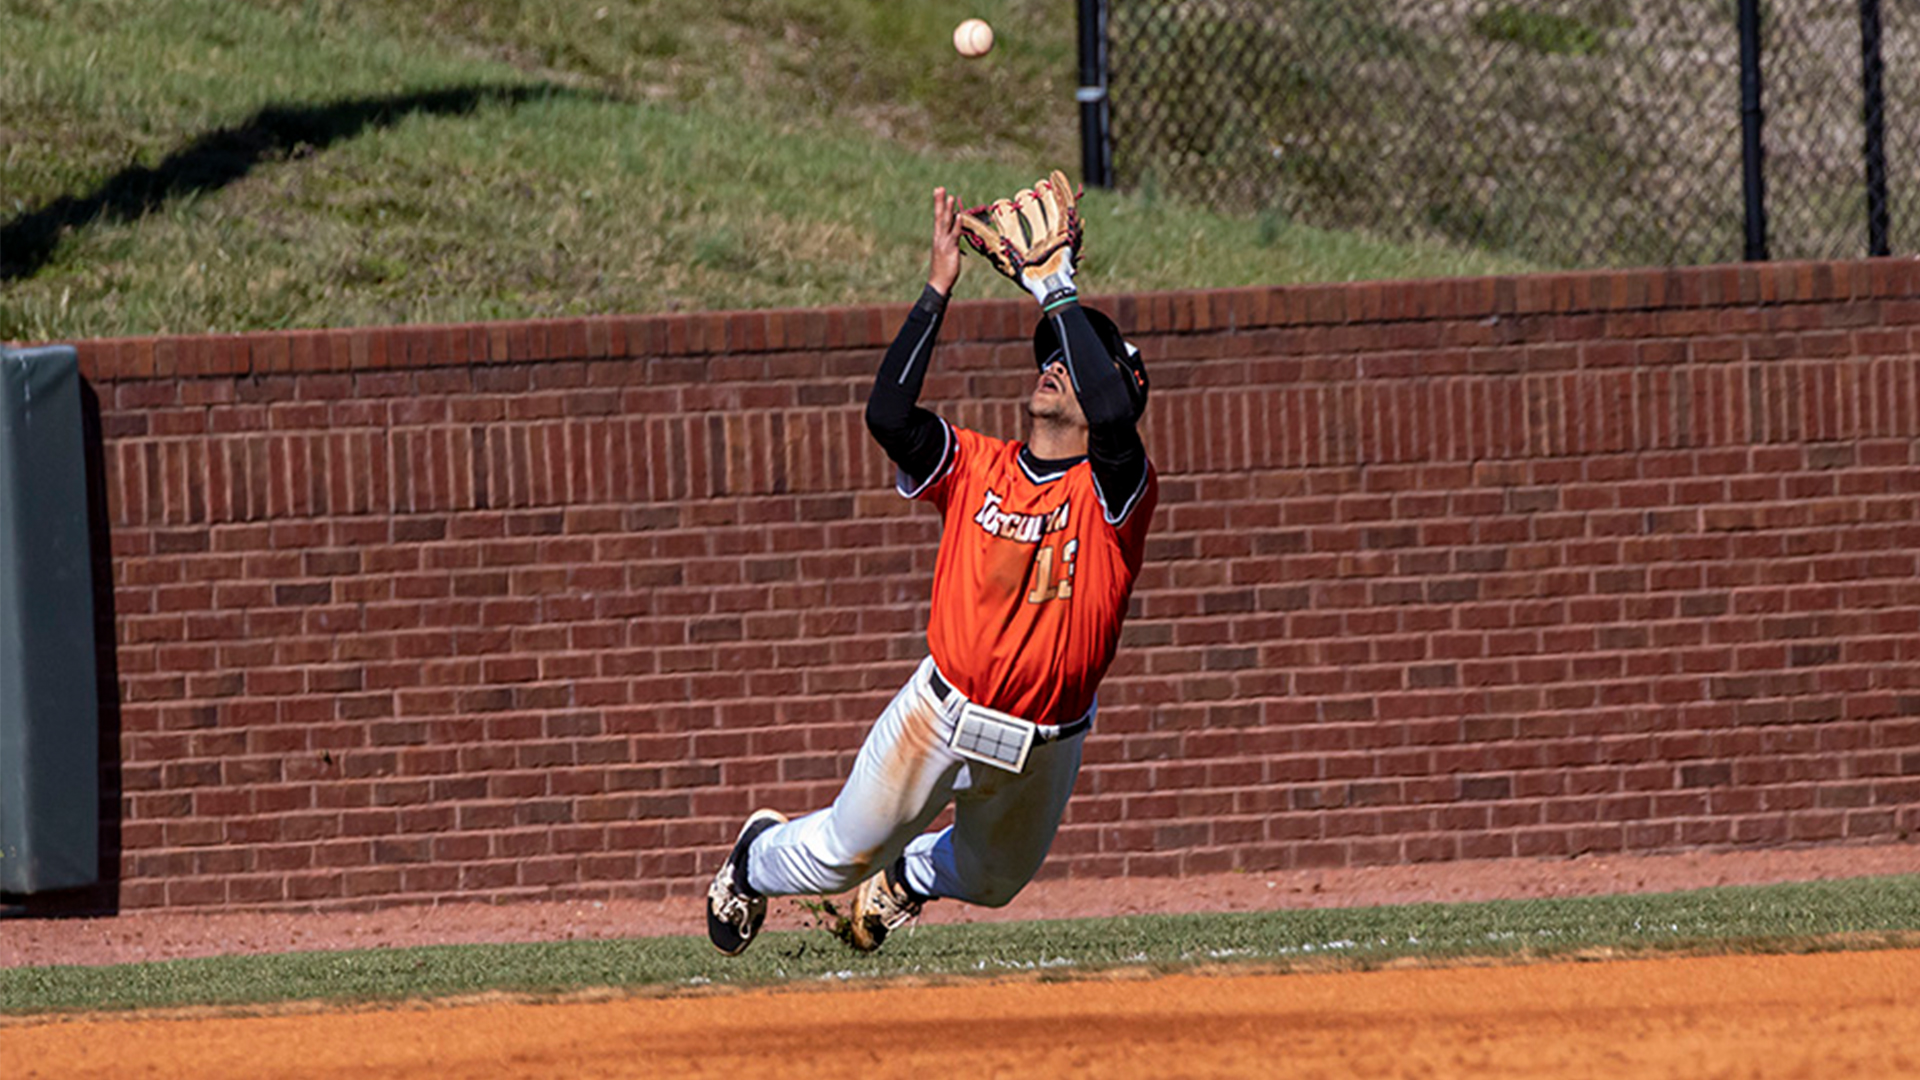 Jaden Steagall makes this fantastic catch in foul territory as Tusculum battled No. 20/11 Lenoir-Rhyne (photo by Chuck Williams)